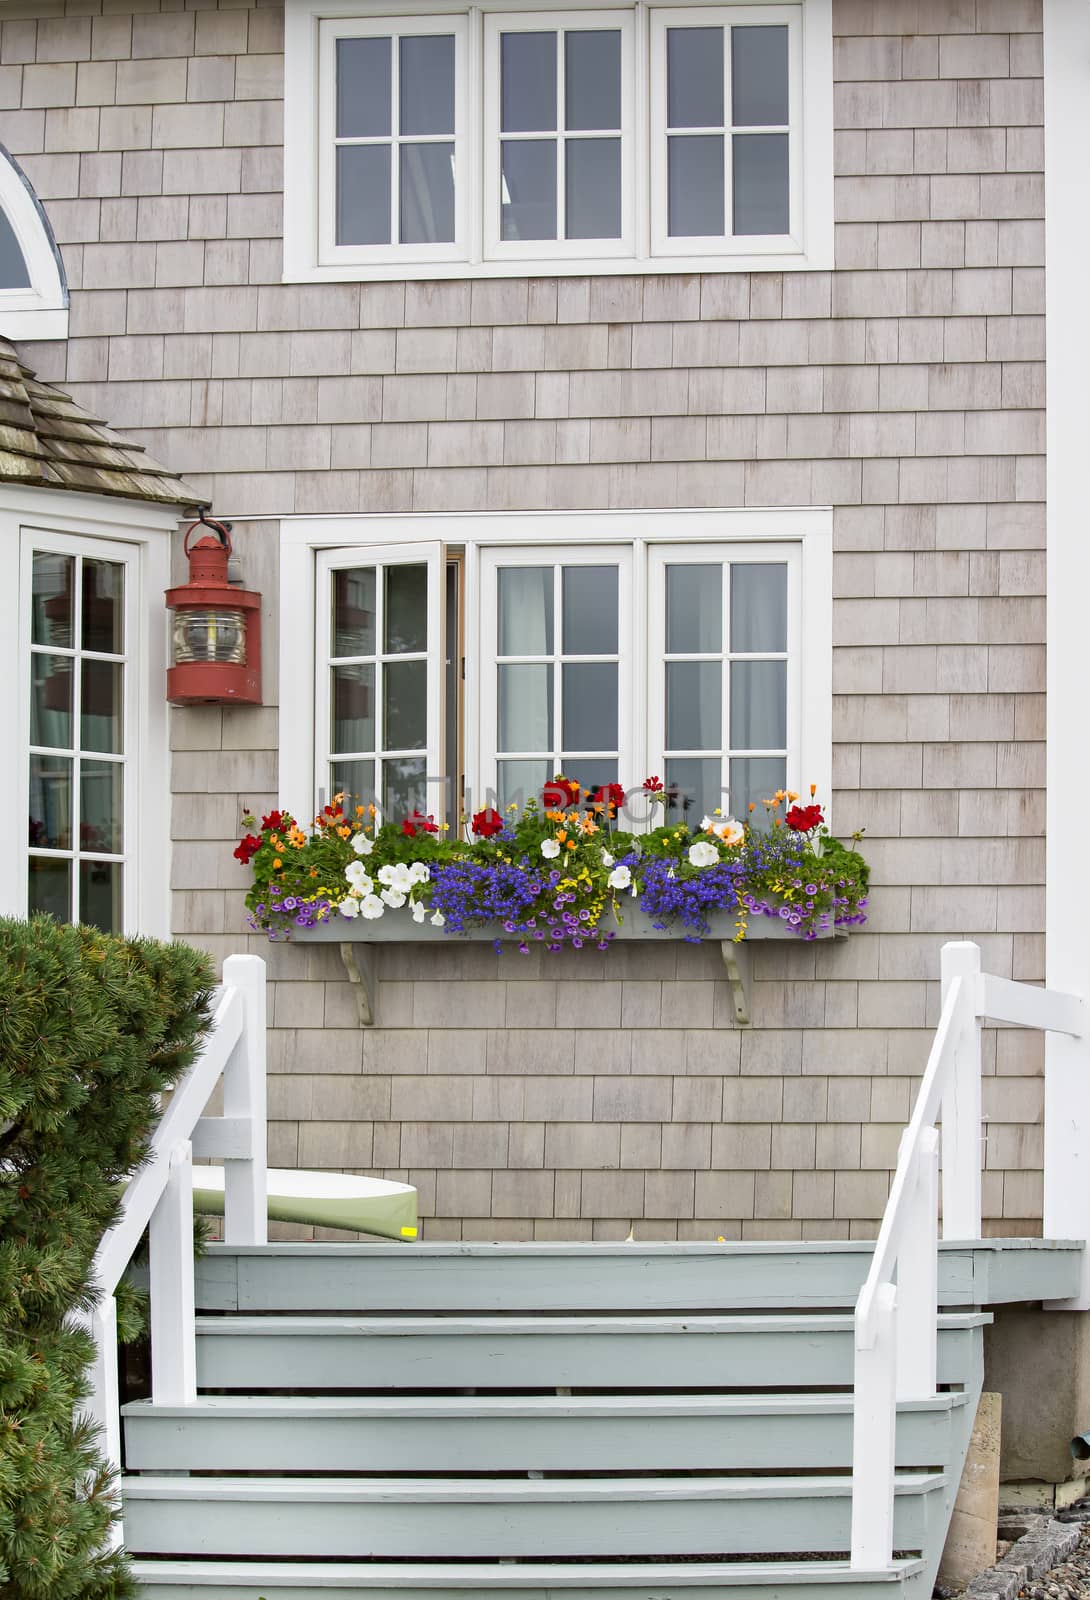 The entrance to this home is very friendly looking with the planter full of bright flowers.